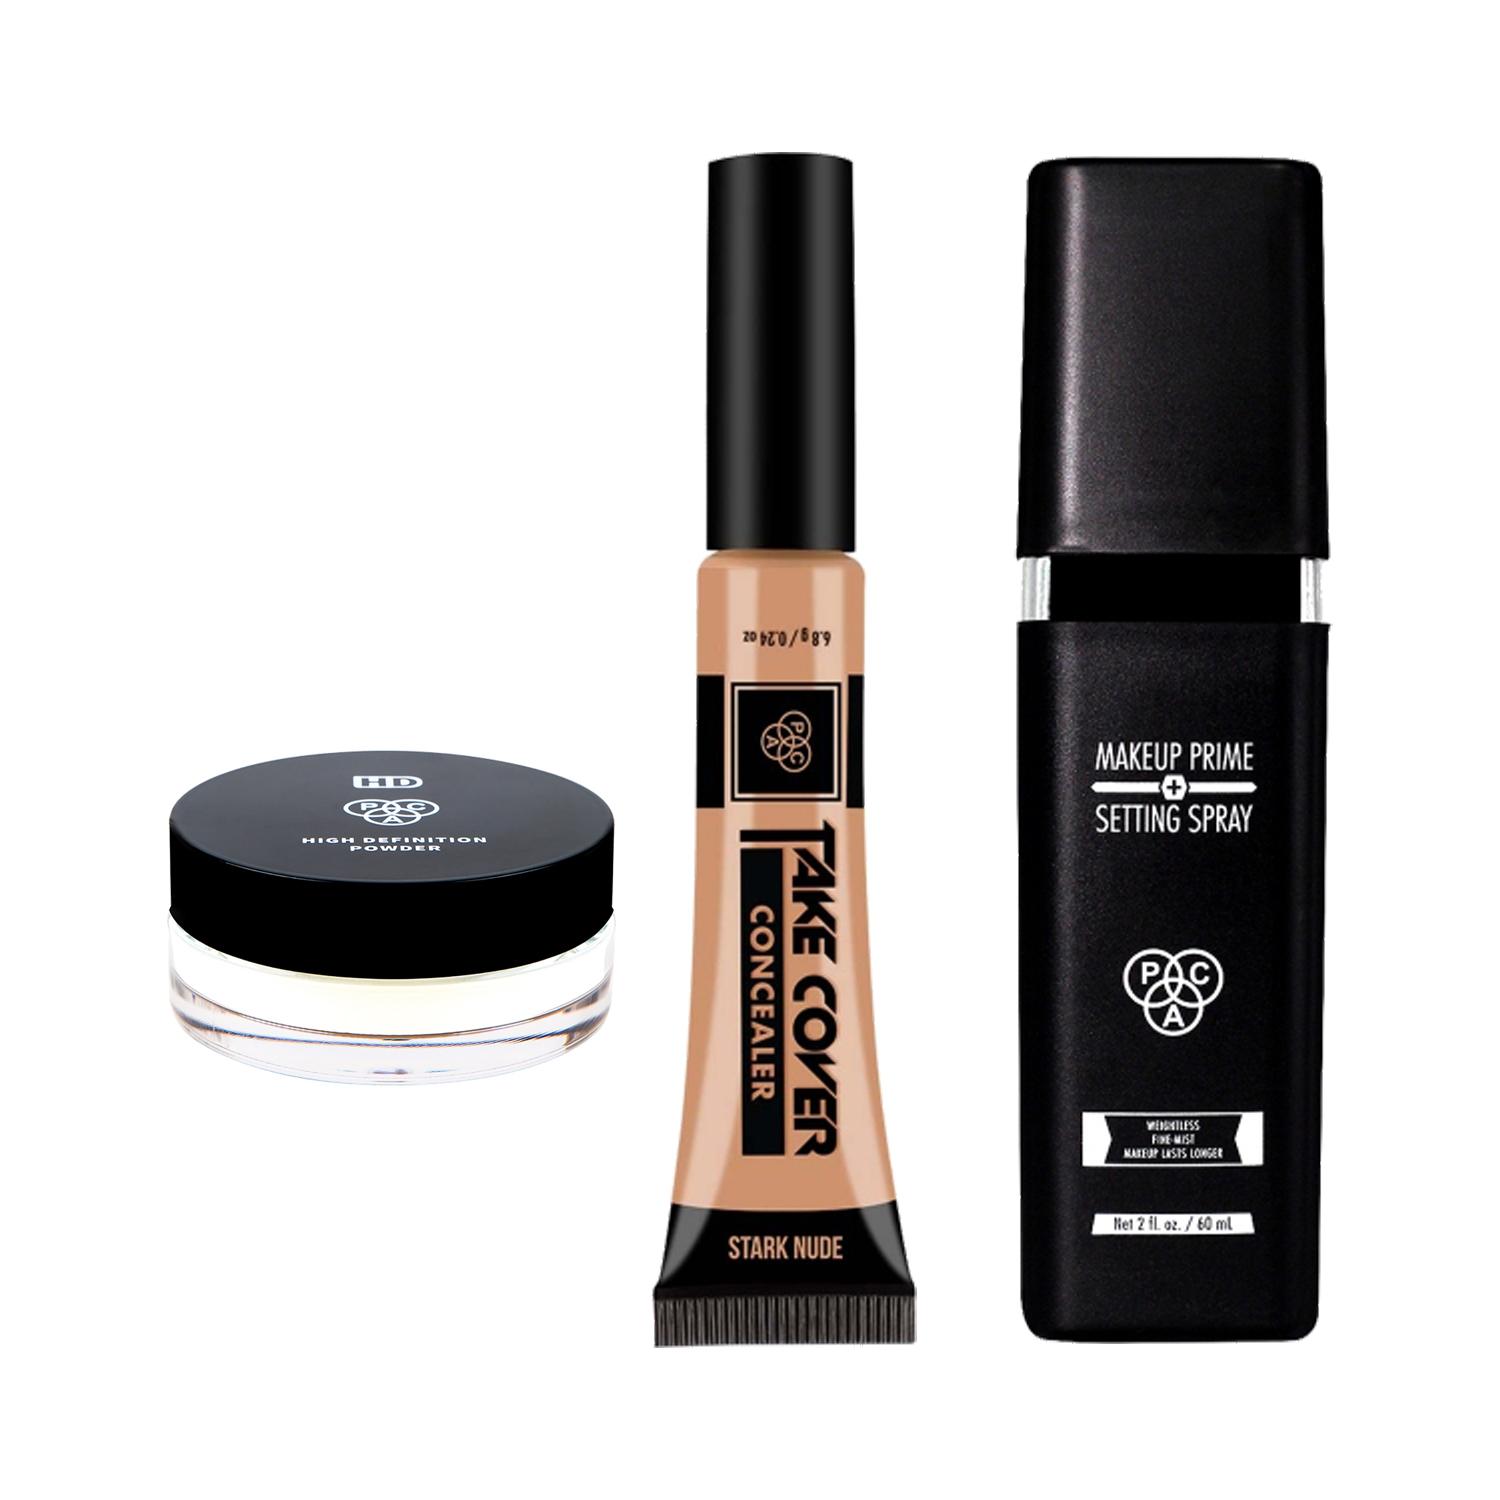 PAC | PAC Makeup Prime & Setting Spray, HD Powder Transparent & Take Cover Concealer - 08 Stark Nude Combo